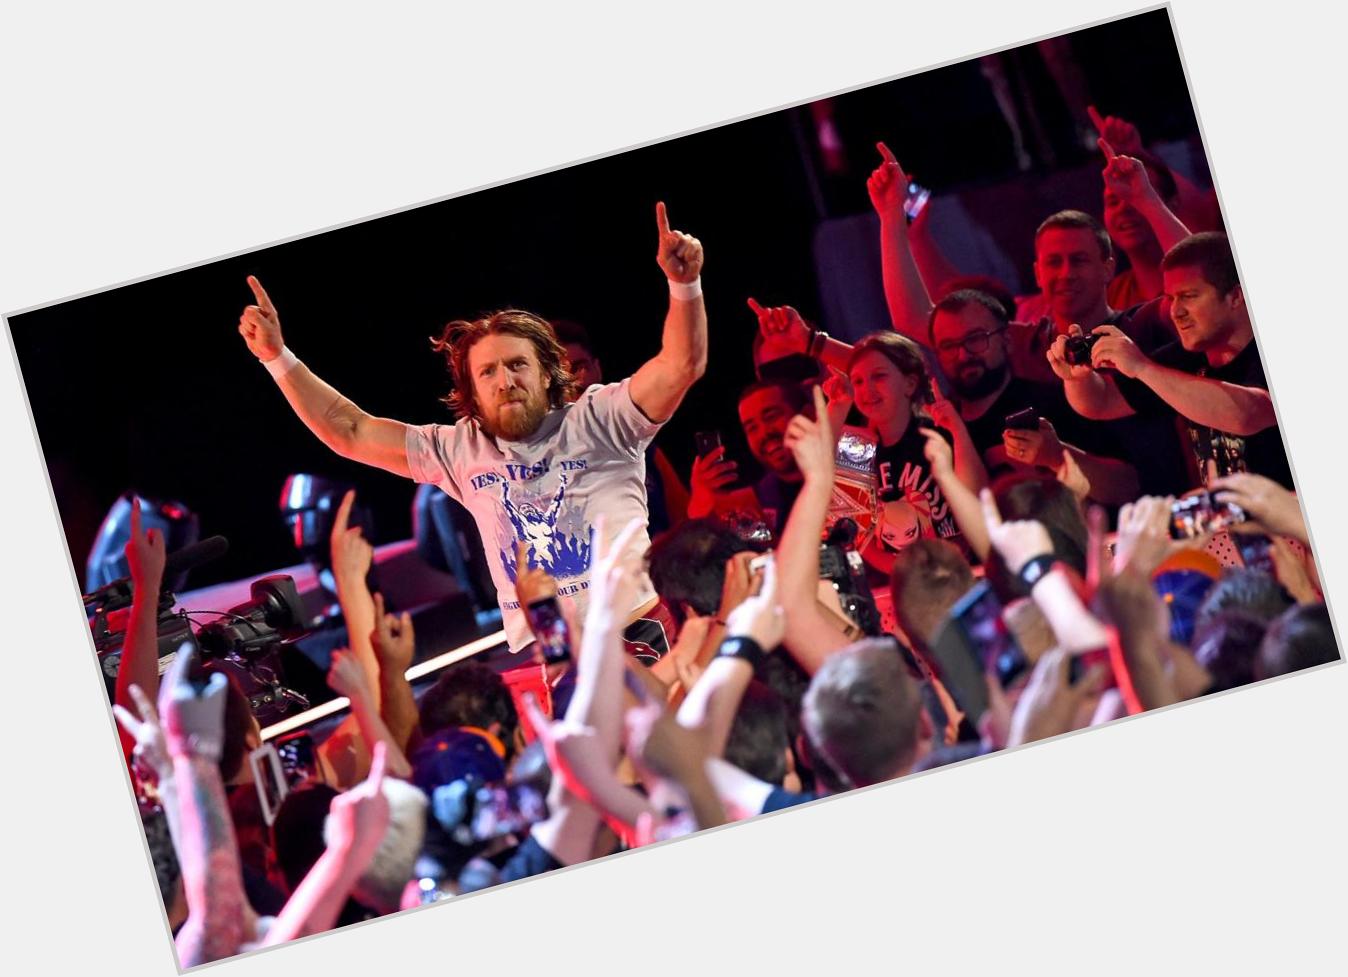 Happy 37th birthday, Daniel Bryan! How great is it to have this guy back in the ring? 